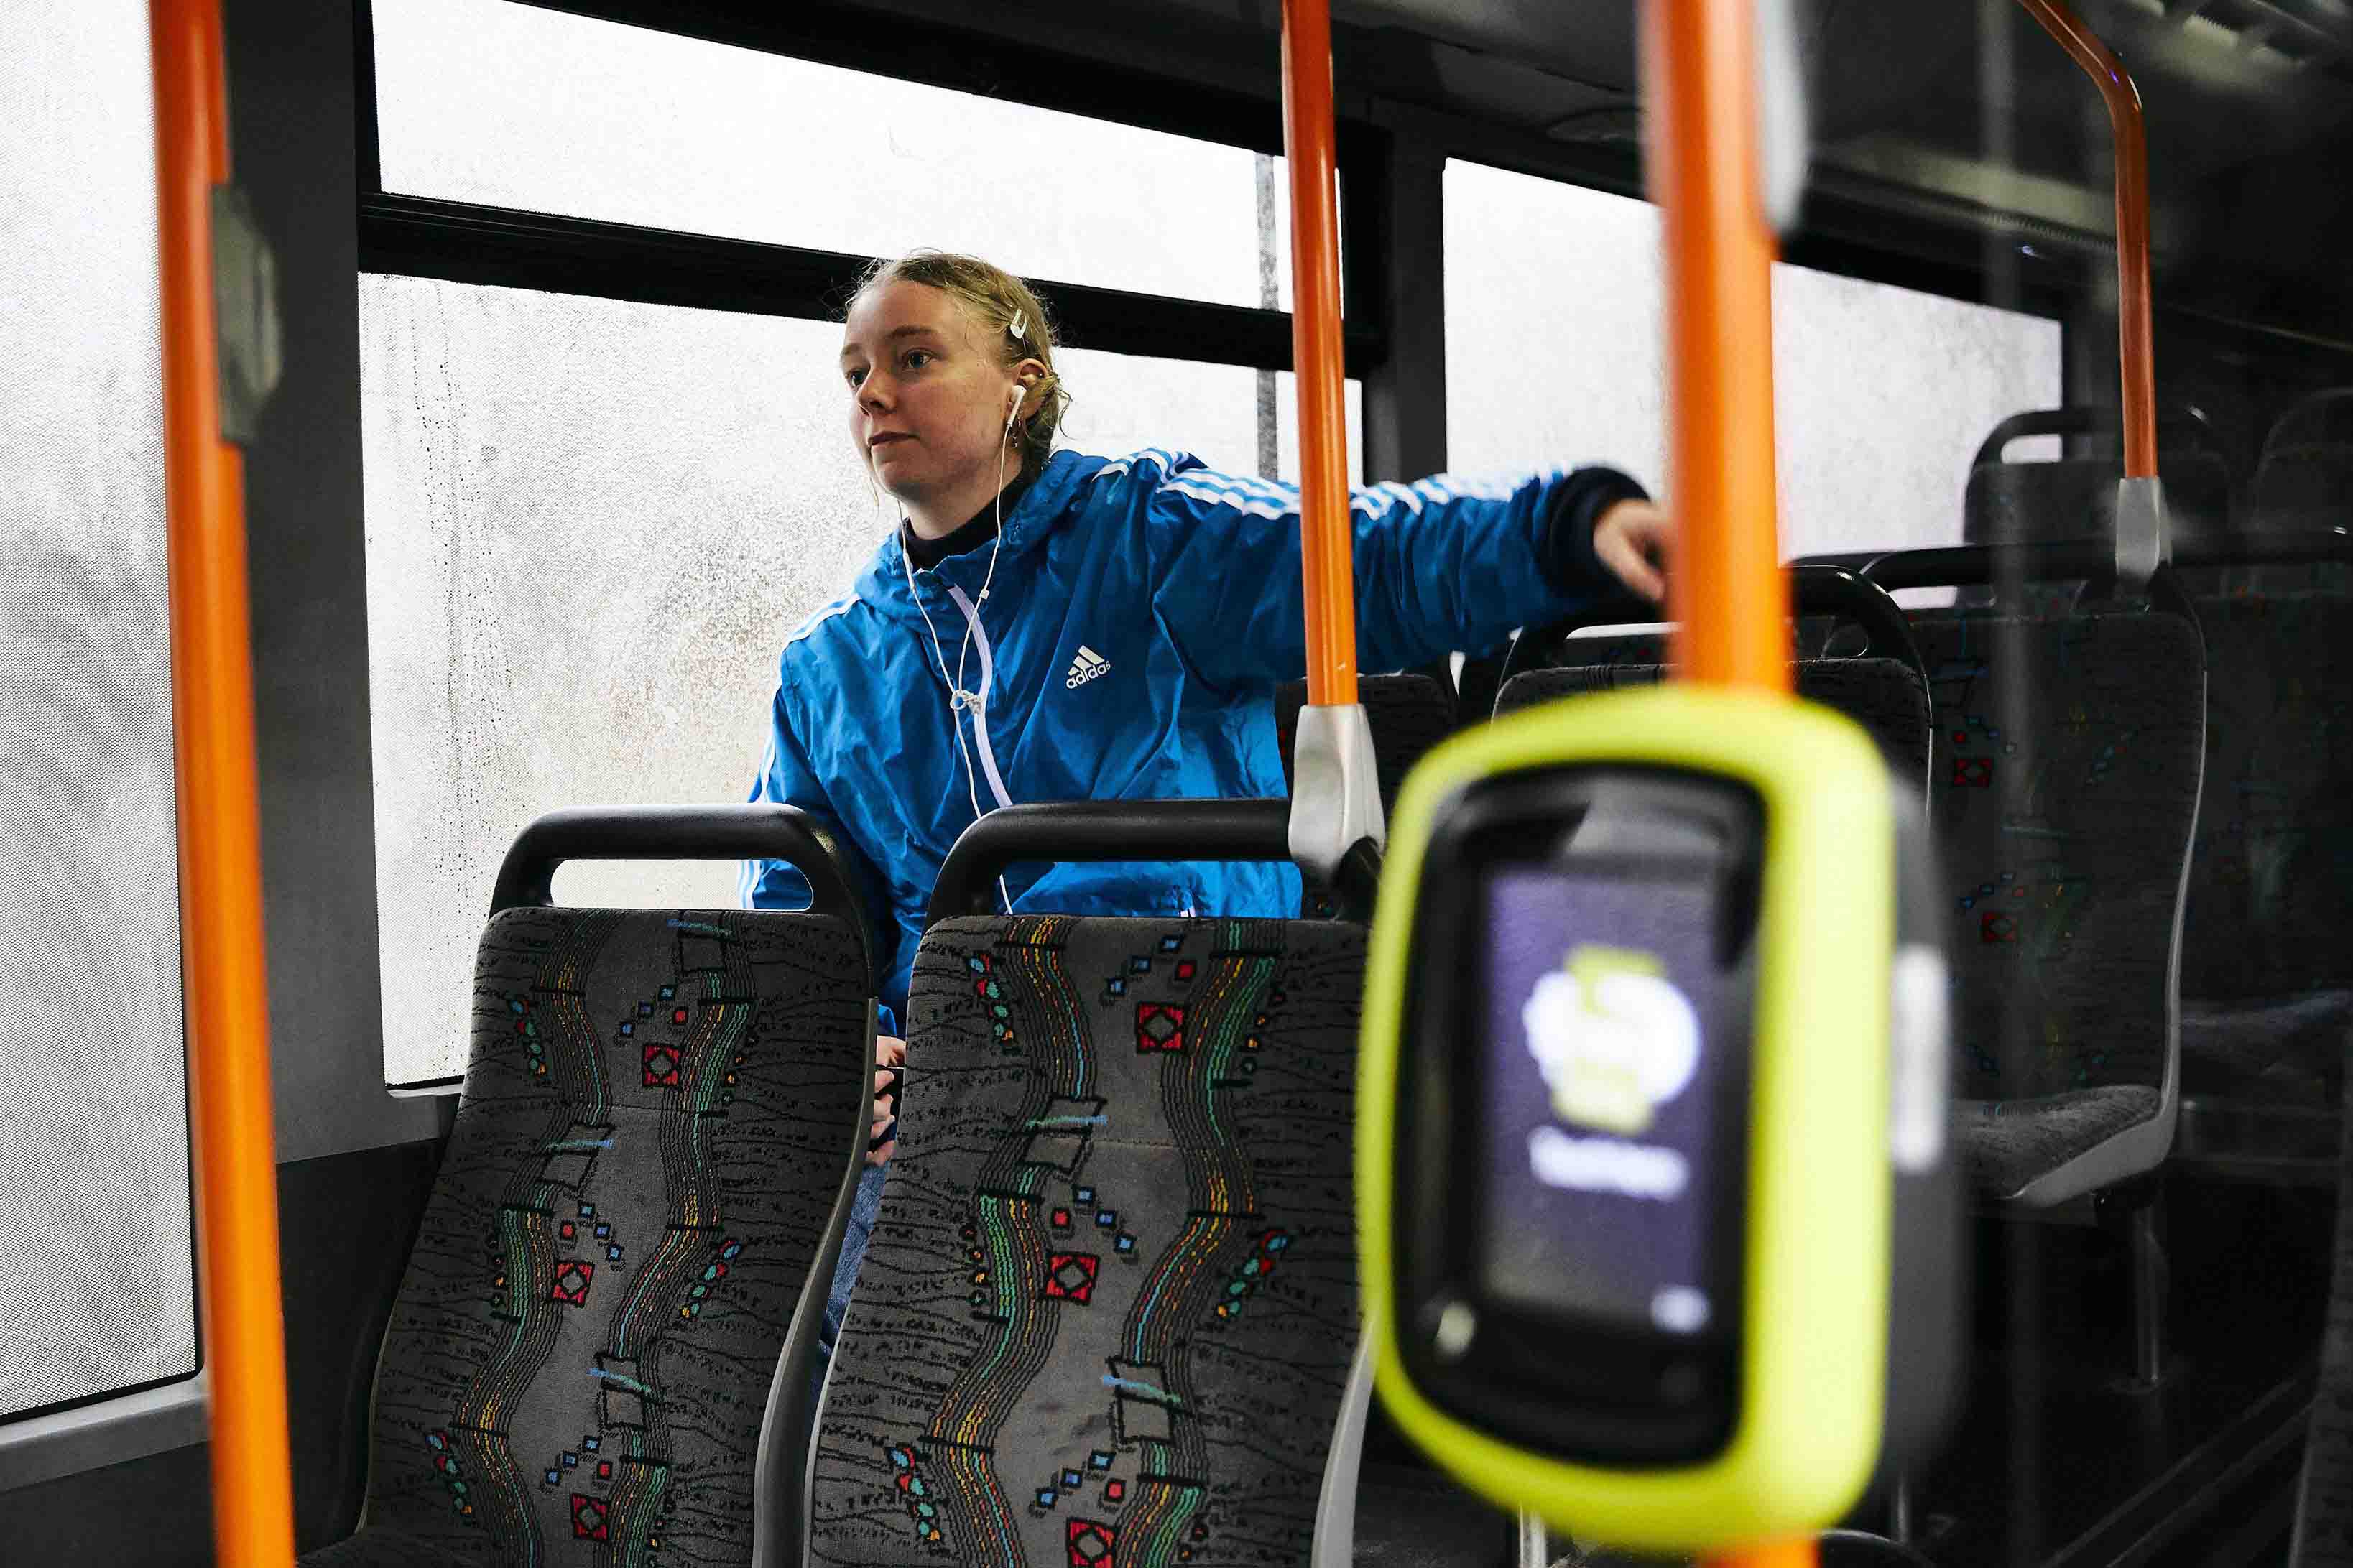 Image shows a young woman travelling on a bus. There is a myki card reader in the foreground.